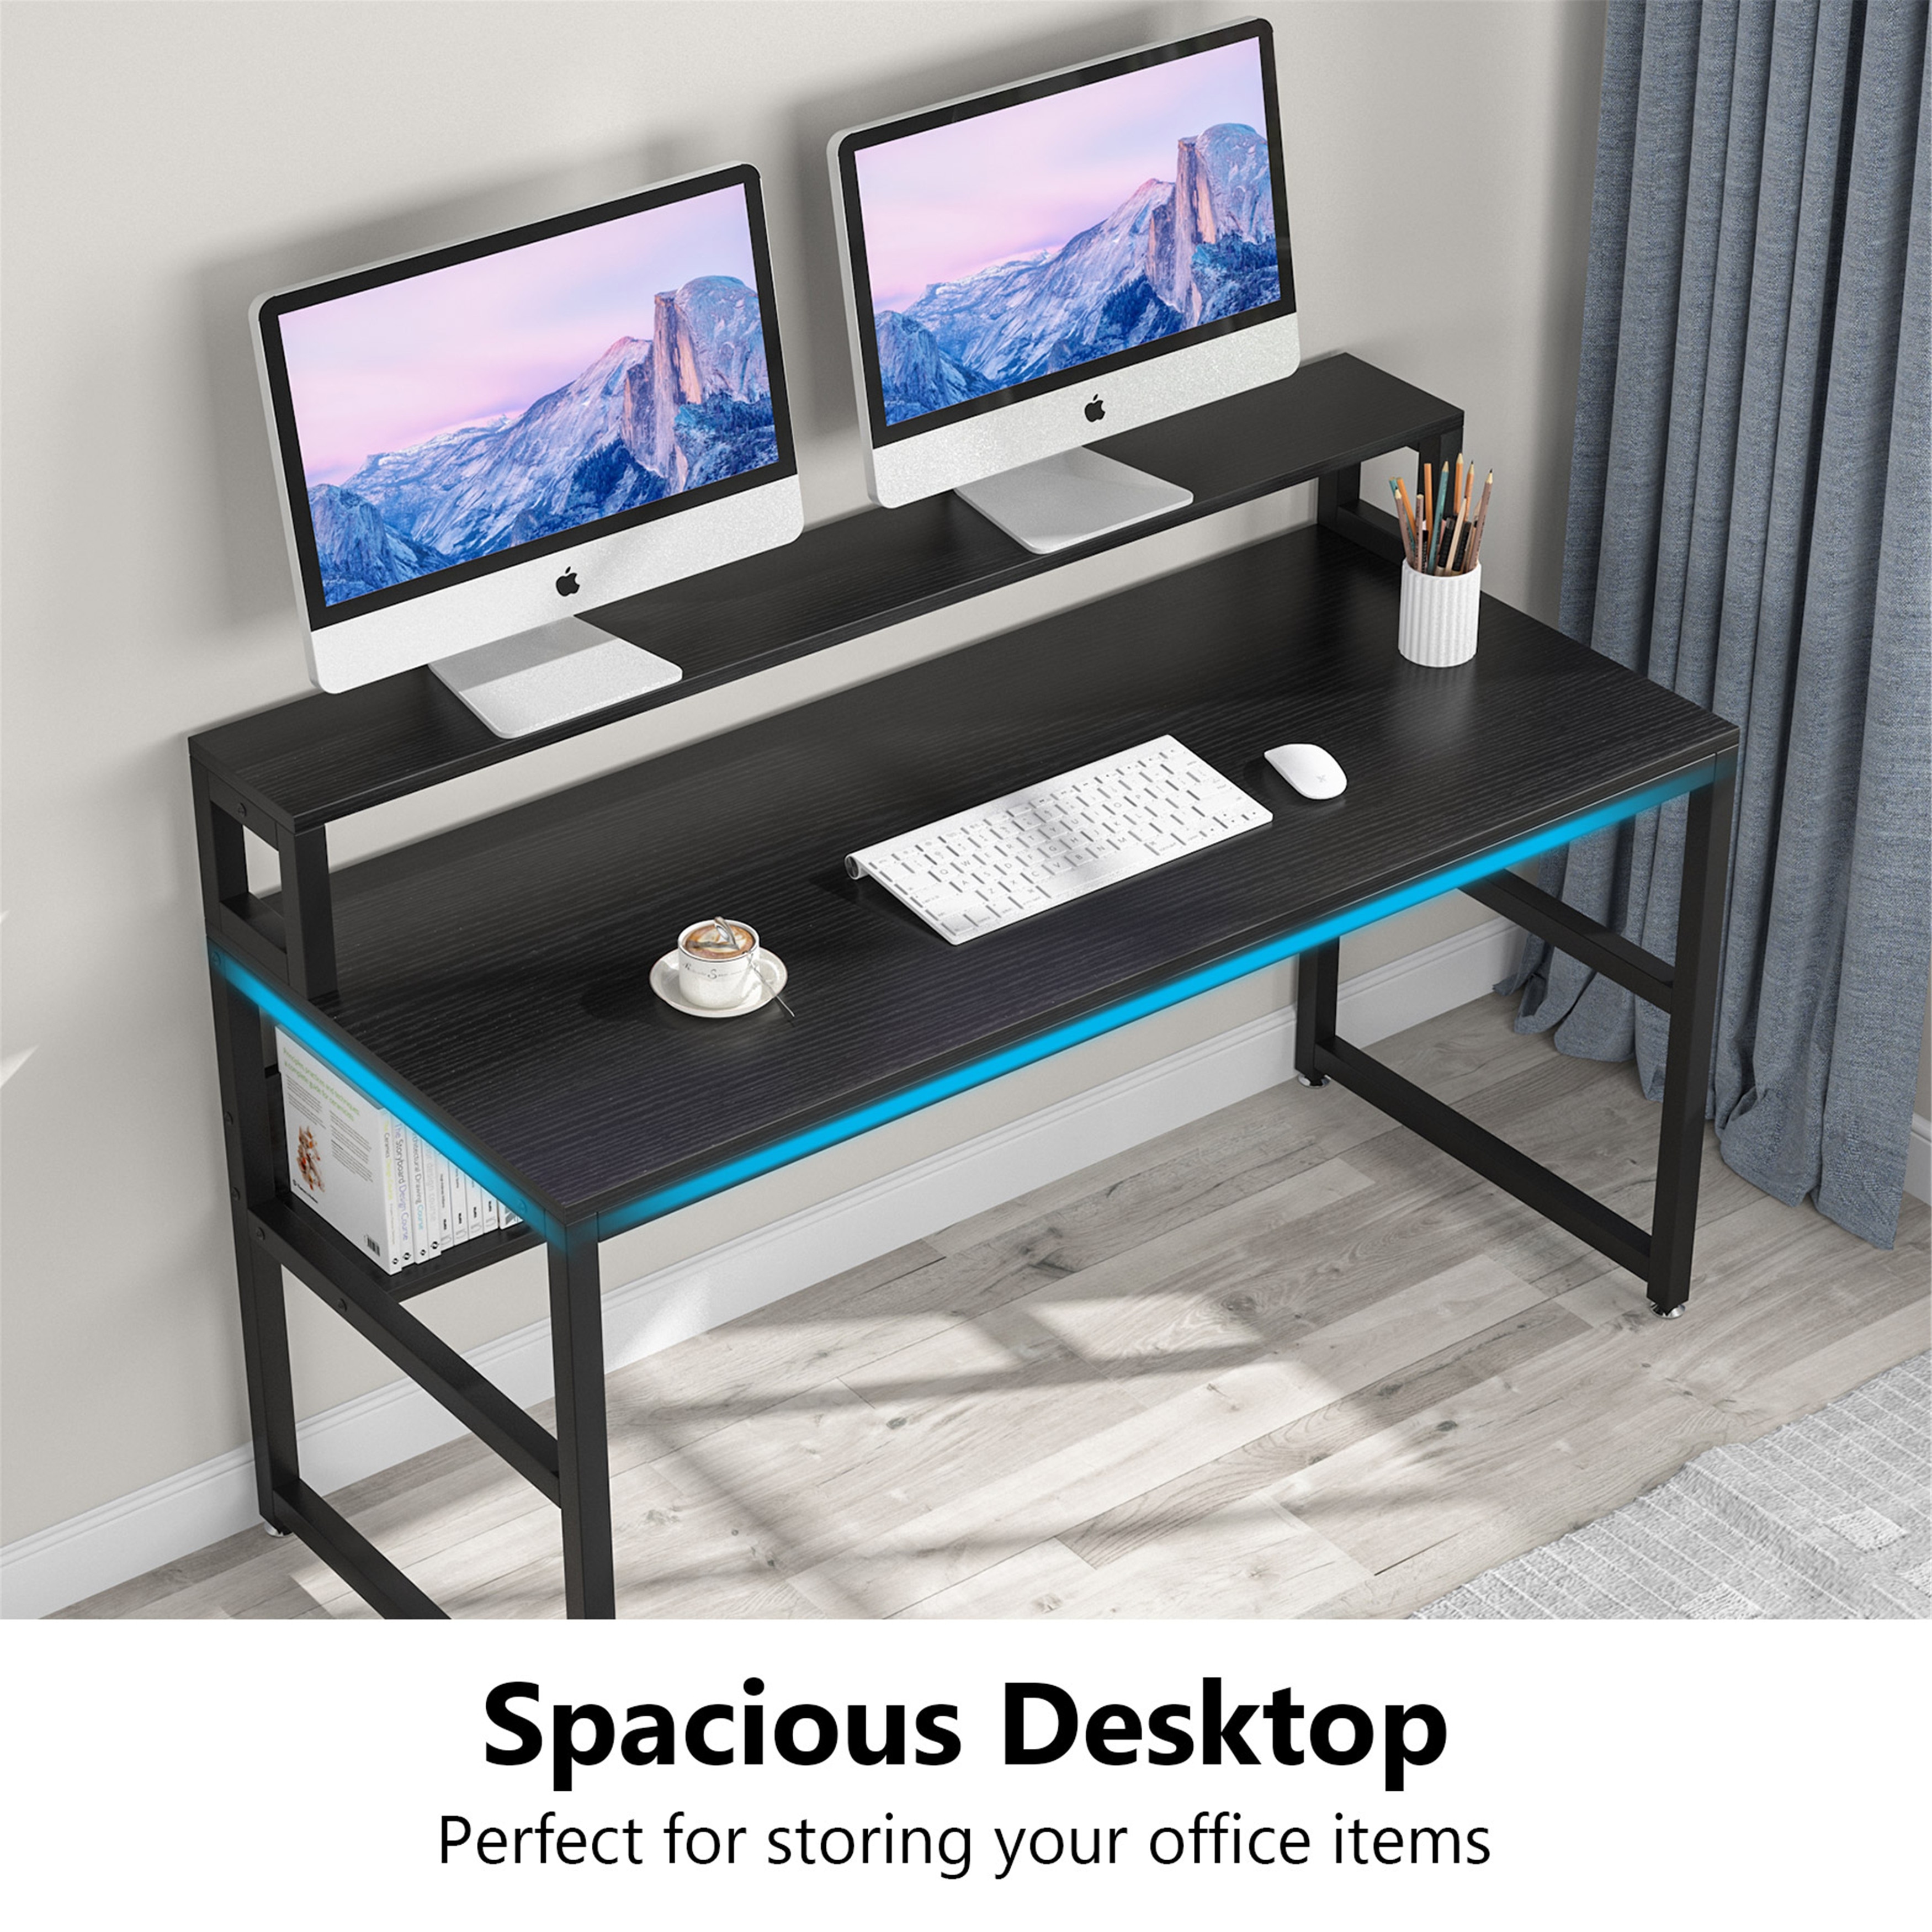 https://ak1.ostkcdn.com/images/products/is/images/direct/7449223dcbf3b402cdb77fa71258bf2e14cdd44a/55%22-Computer-Desk-with-Shelves-and-Monitor-Stand.jpg